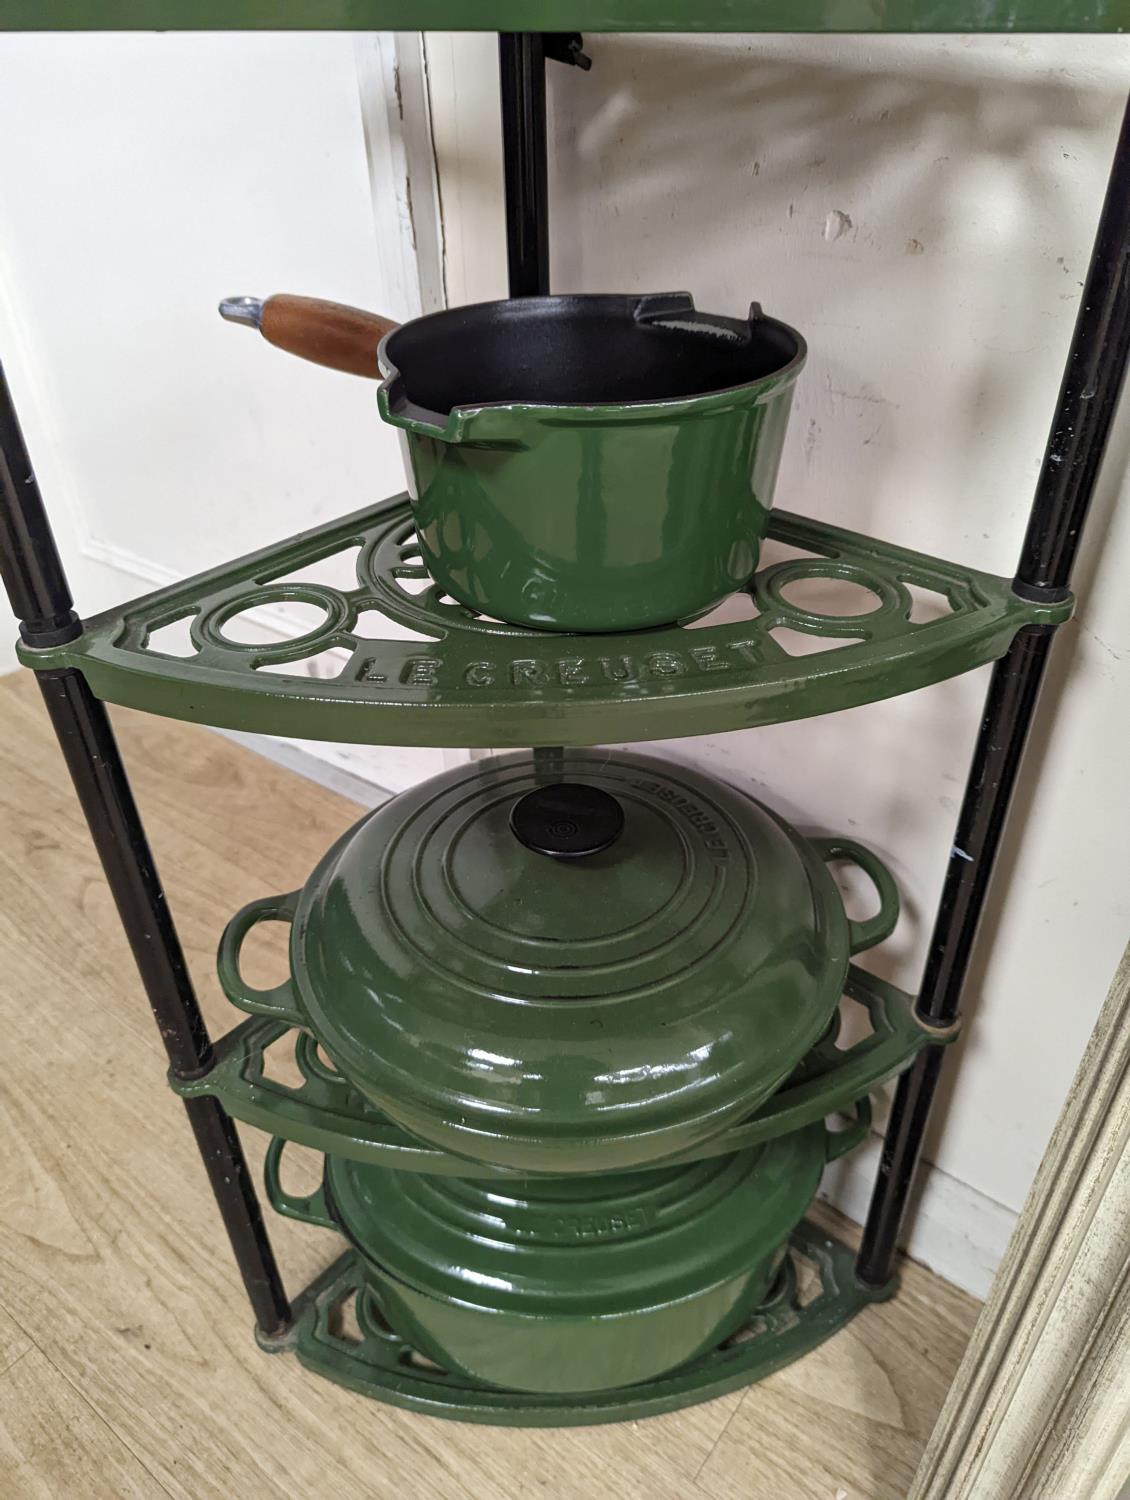 A green enamel Le Cruset pot stand, three pans and a bottle rack,stand 90 cms high. - Image 4 of 5